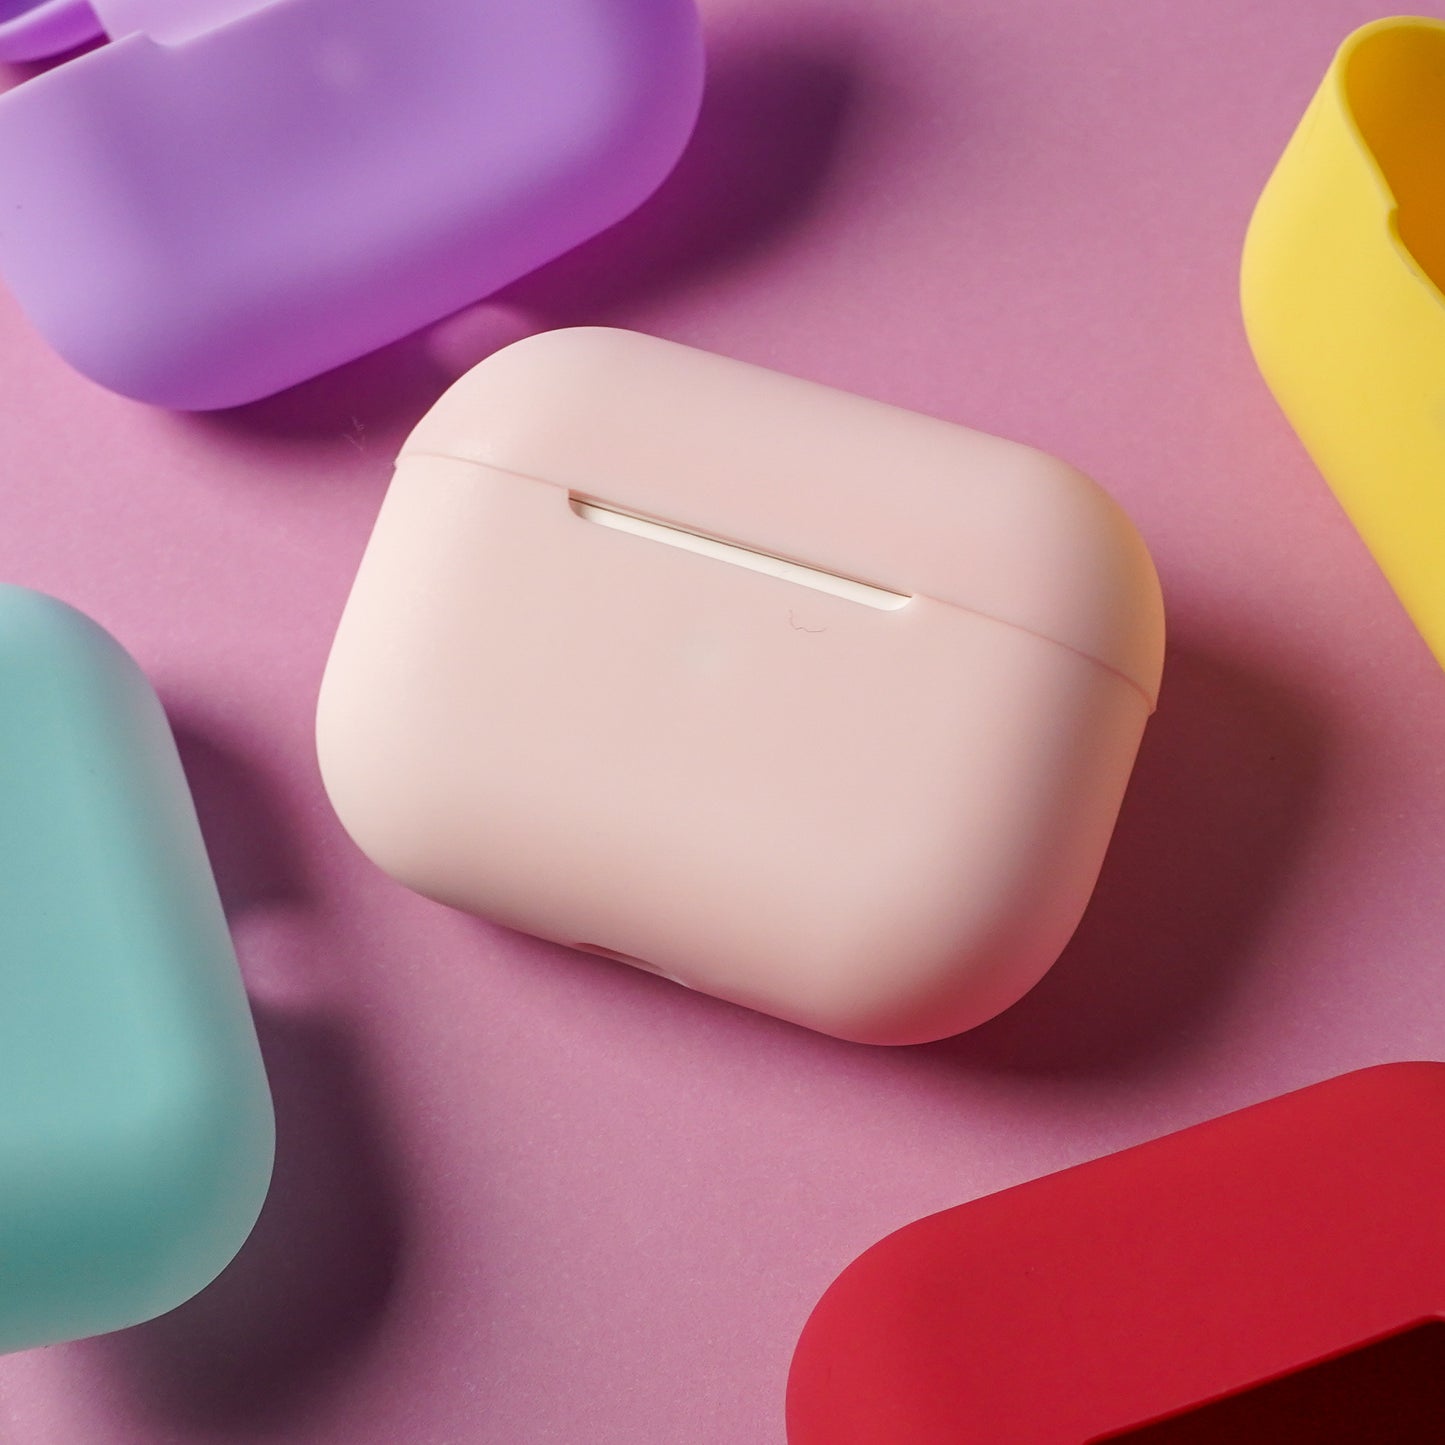 Silicone AirPods Pro Case Airpods Case